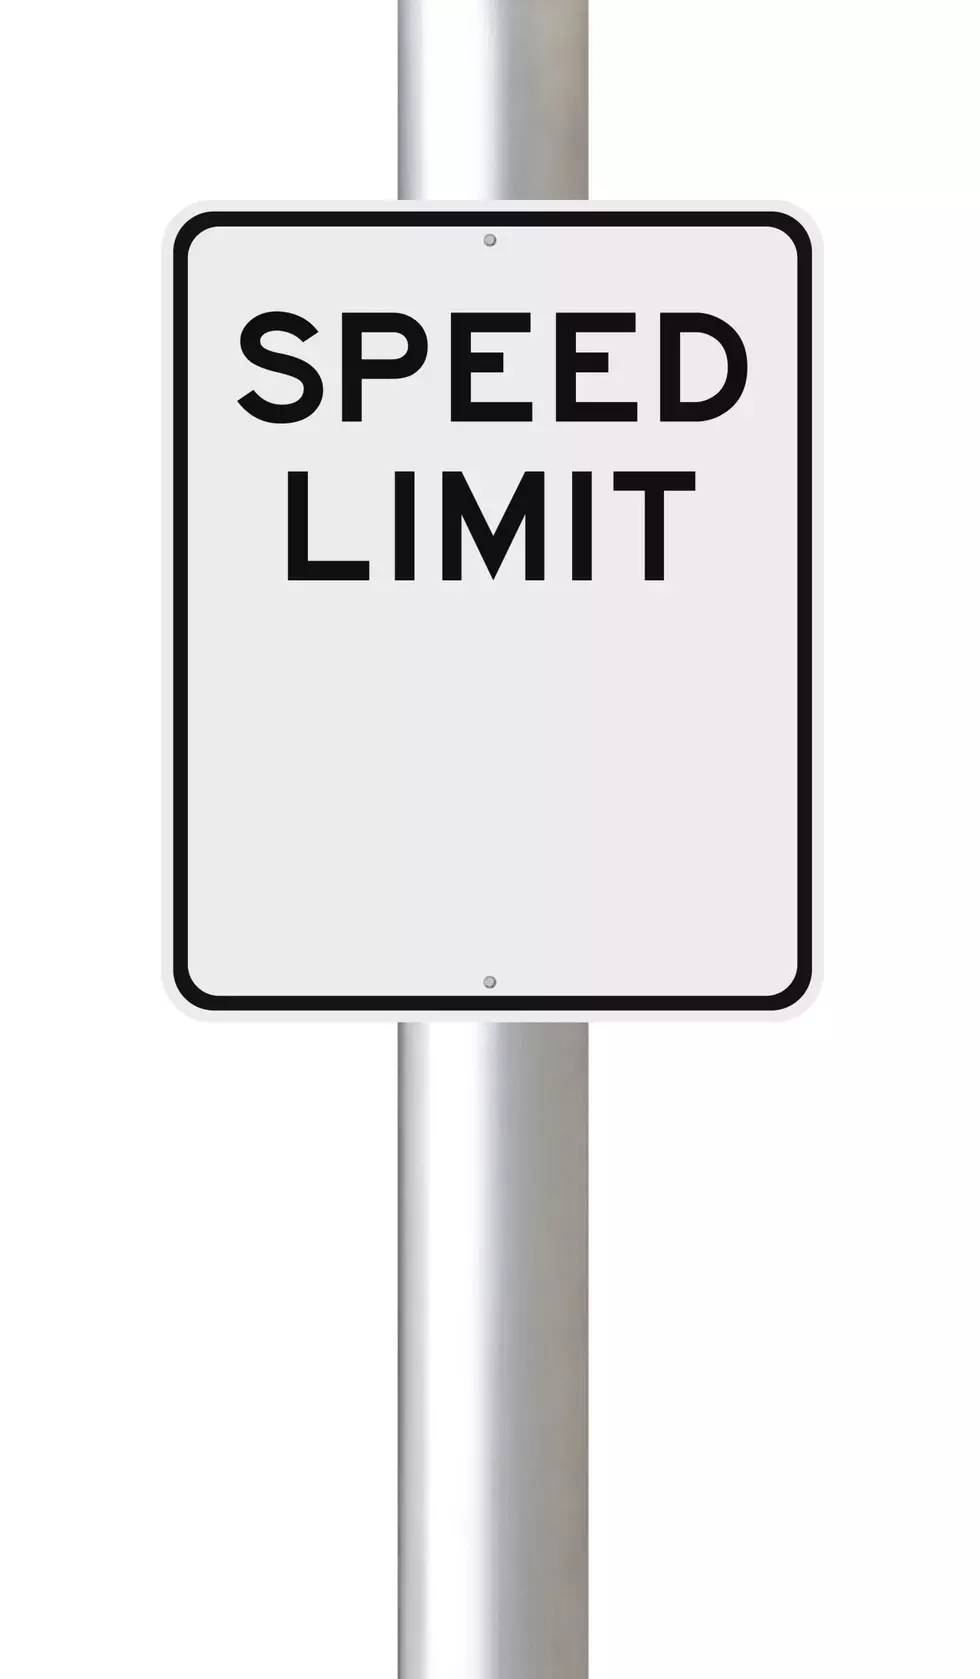 City Council to Vote on Speed Limit Change on Hankins Road